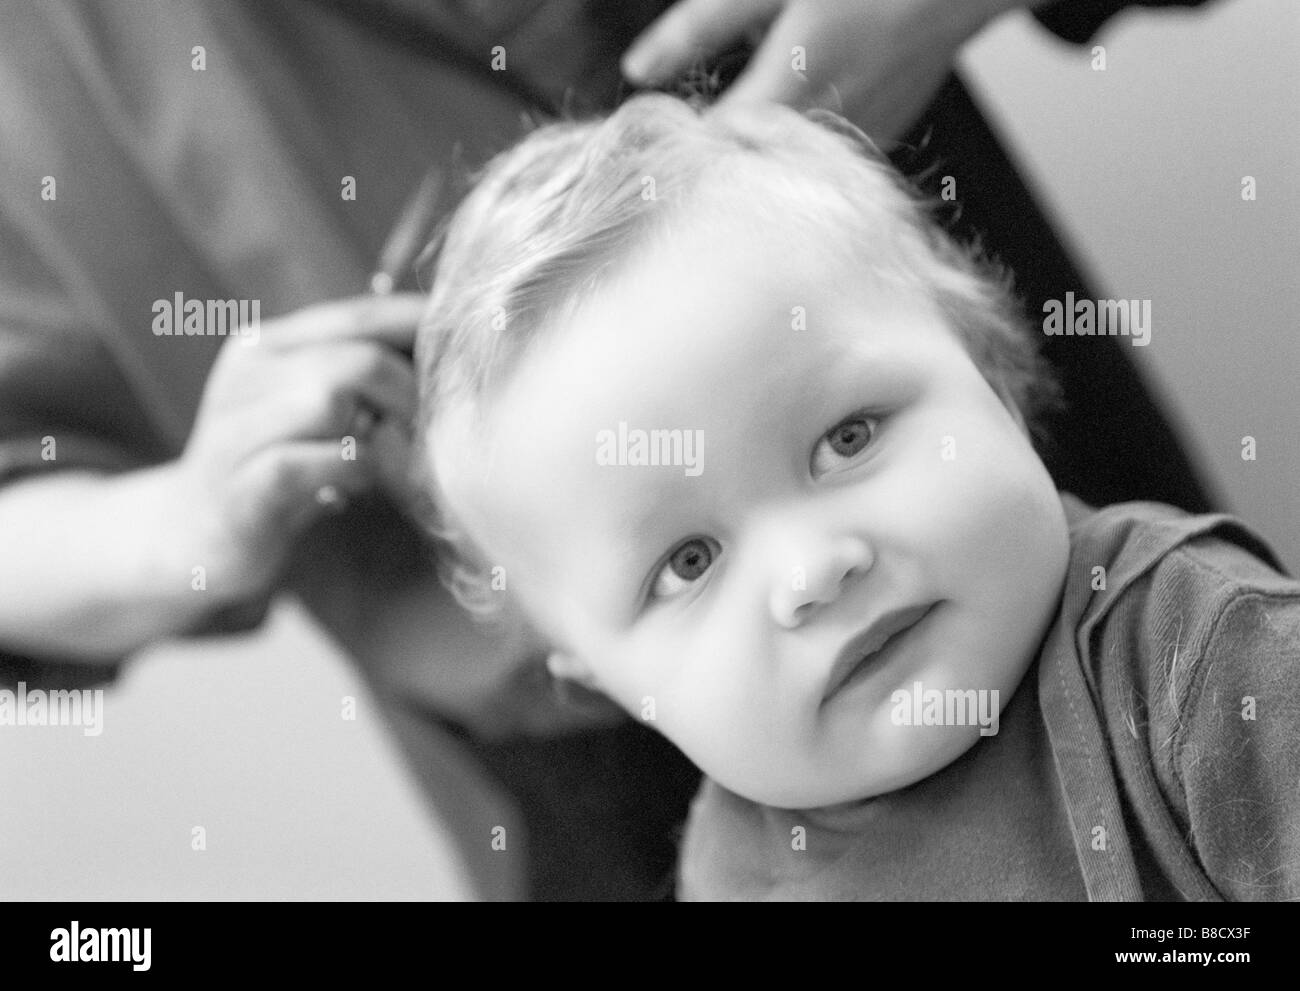 Hair style boy Black and White Stock Photos & Images - Alamy